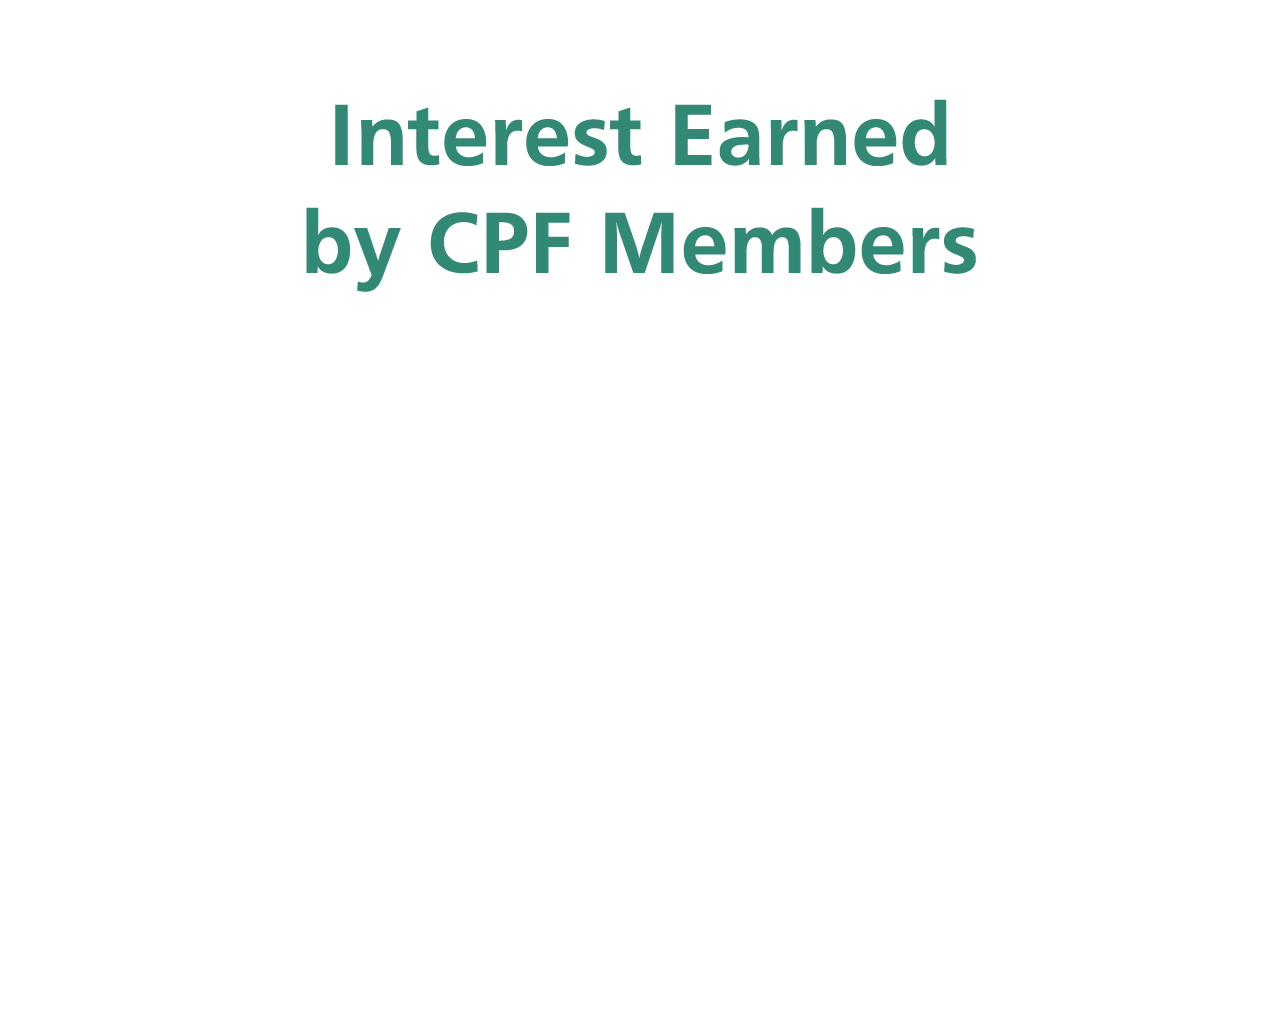 $18.3 billion in interest was credited in total to CPF members' accounts, including $1.8 billion in extra interest.